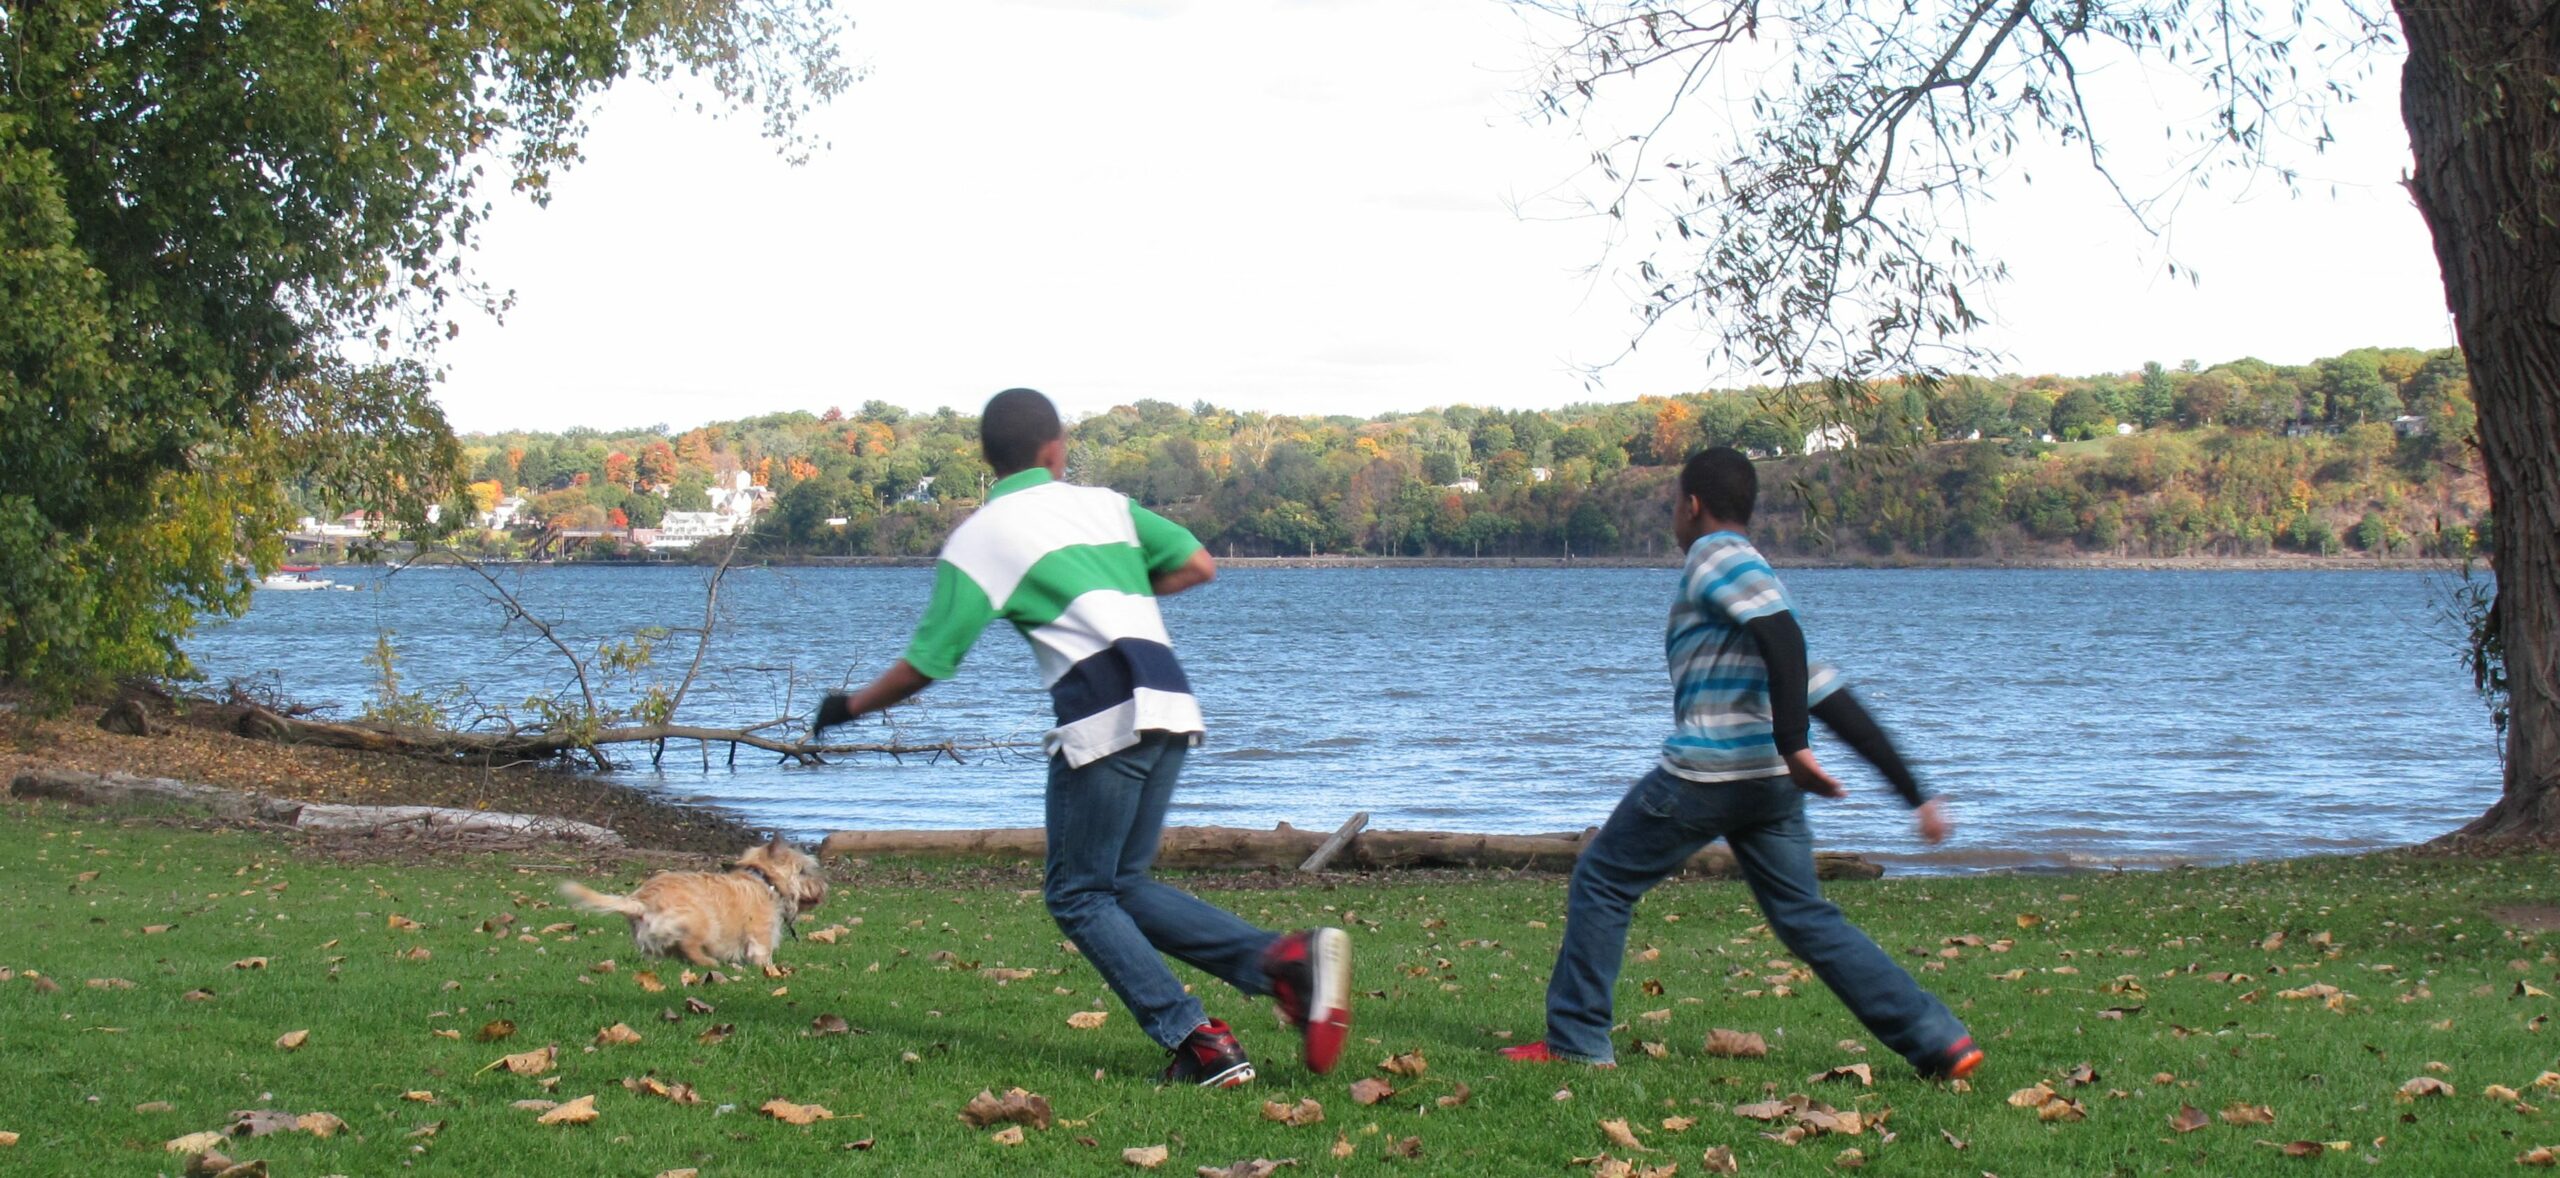 two young, Black boys run and play along a verdant riverbank with a dog. In kind donations to Astor Services promote such joy.